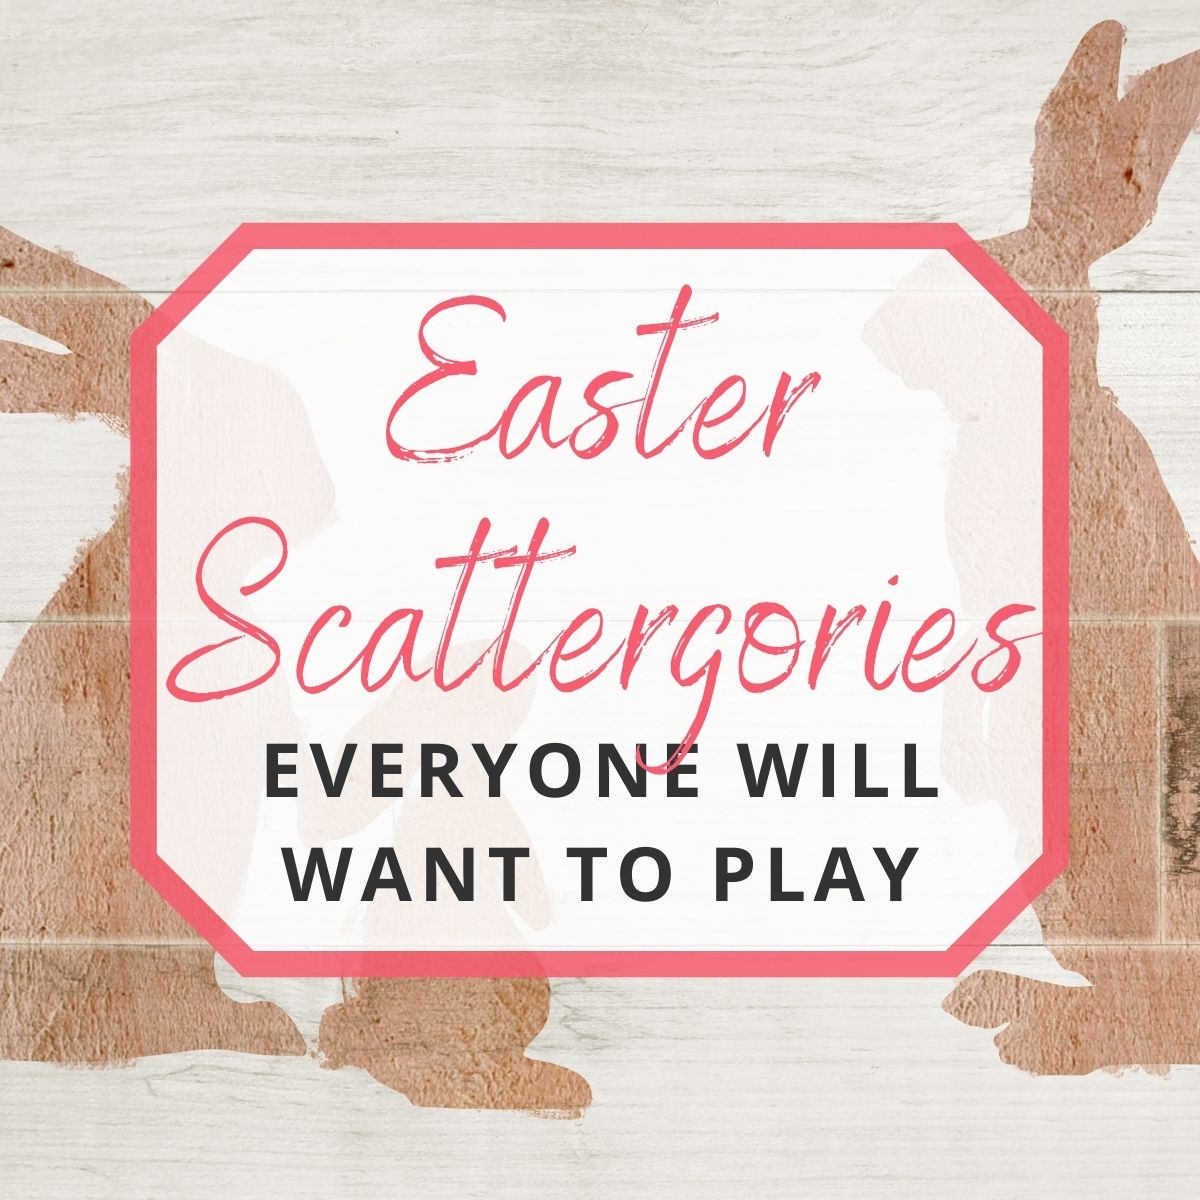 easter scattergories featured image